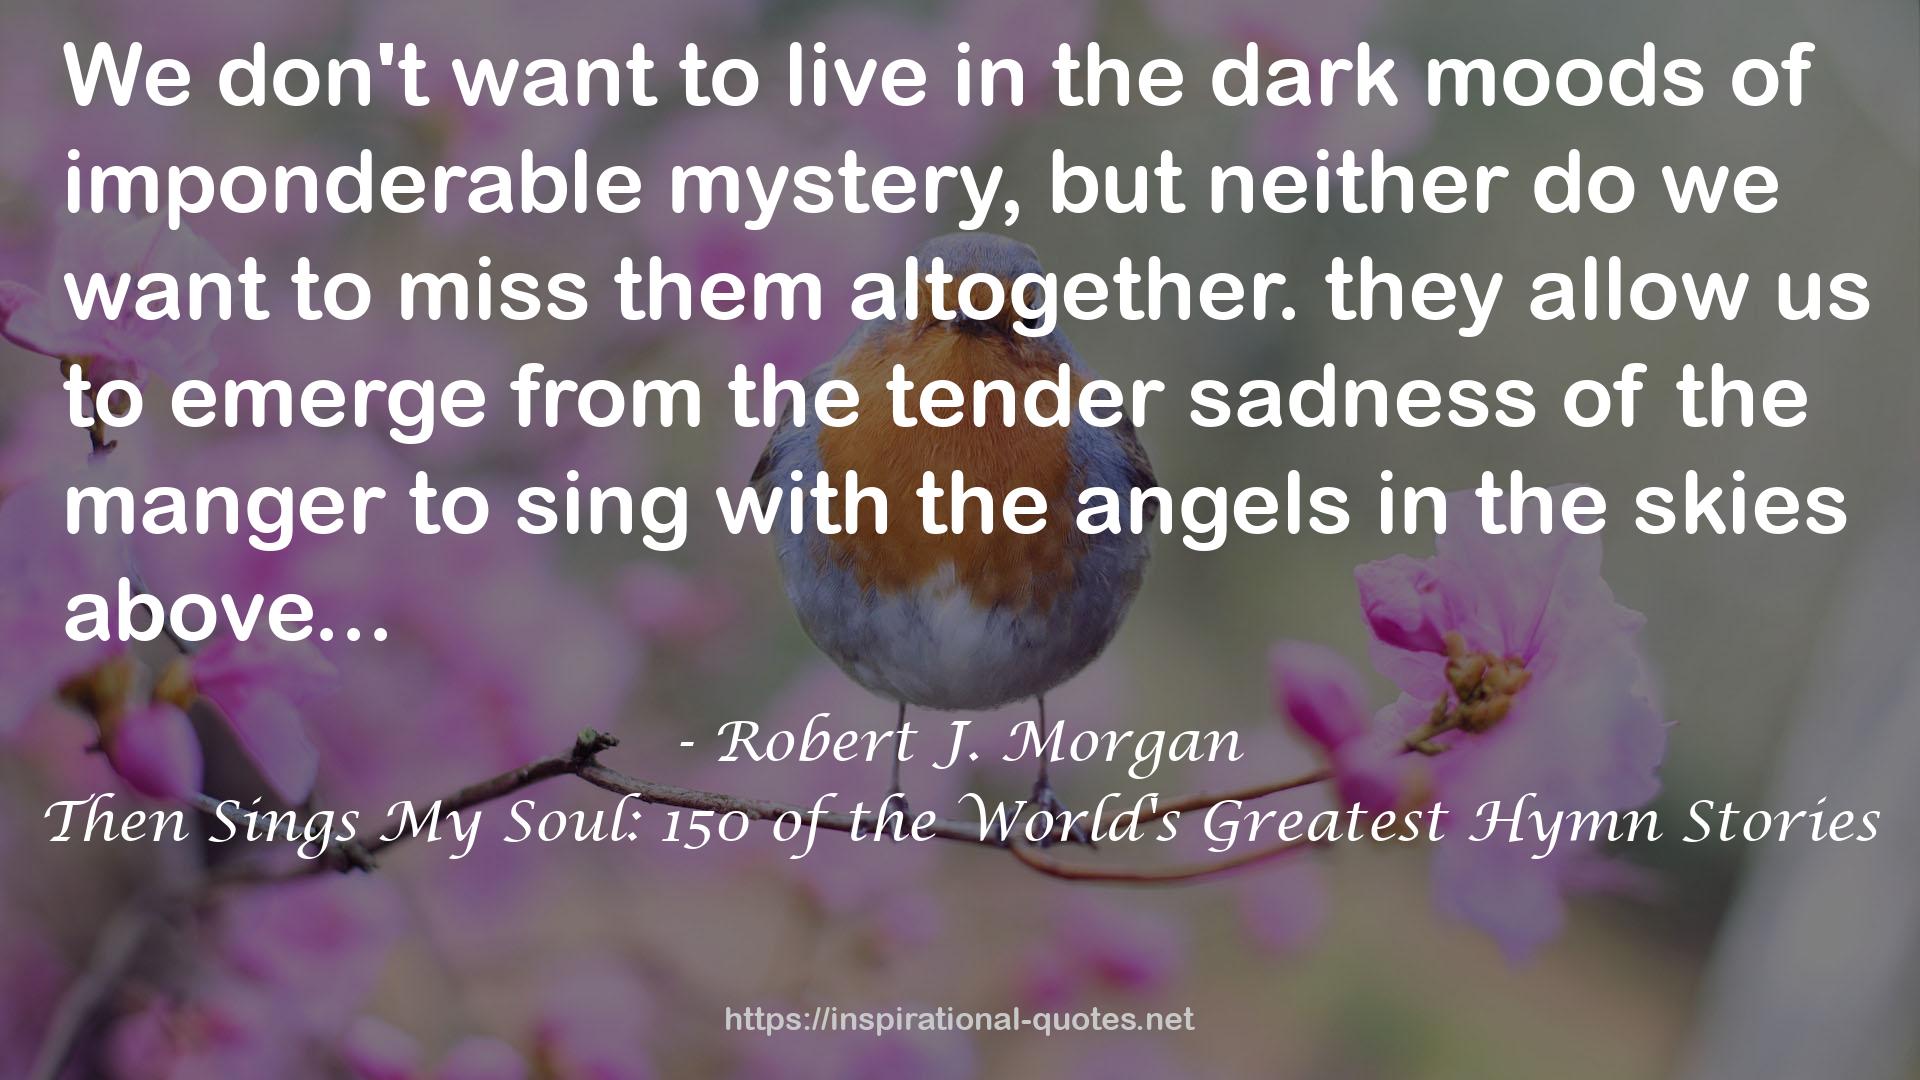 Then Sings My Soul: 150 of the World's Greatest Hymn Stories QUOTES